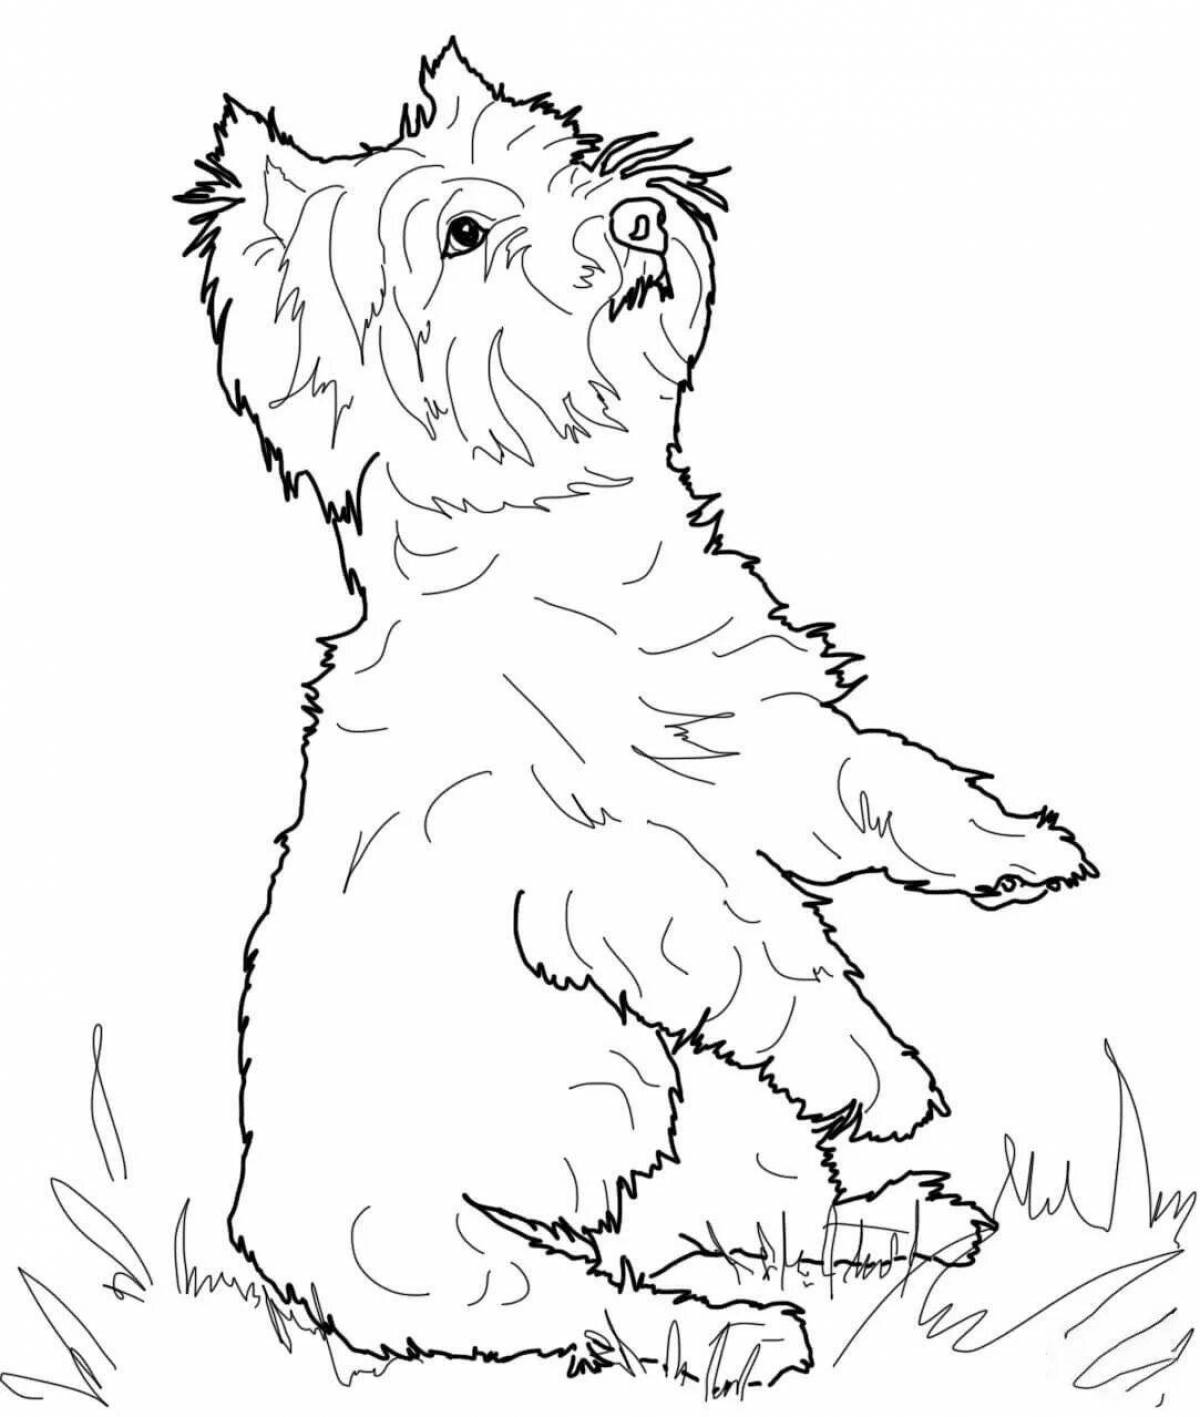 Coloring page gentle yorkshire terrier